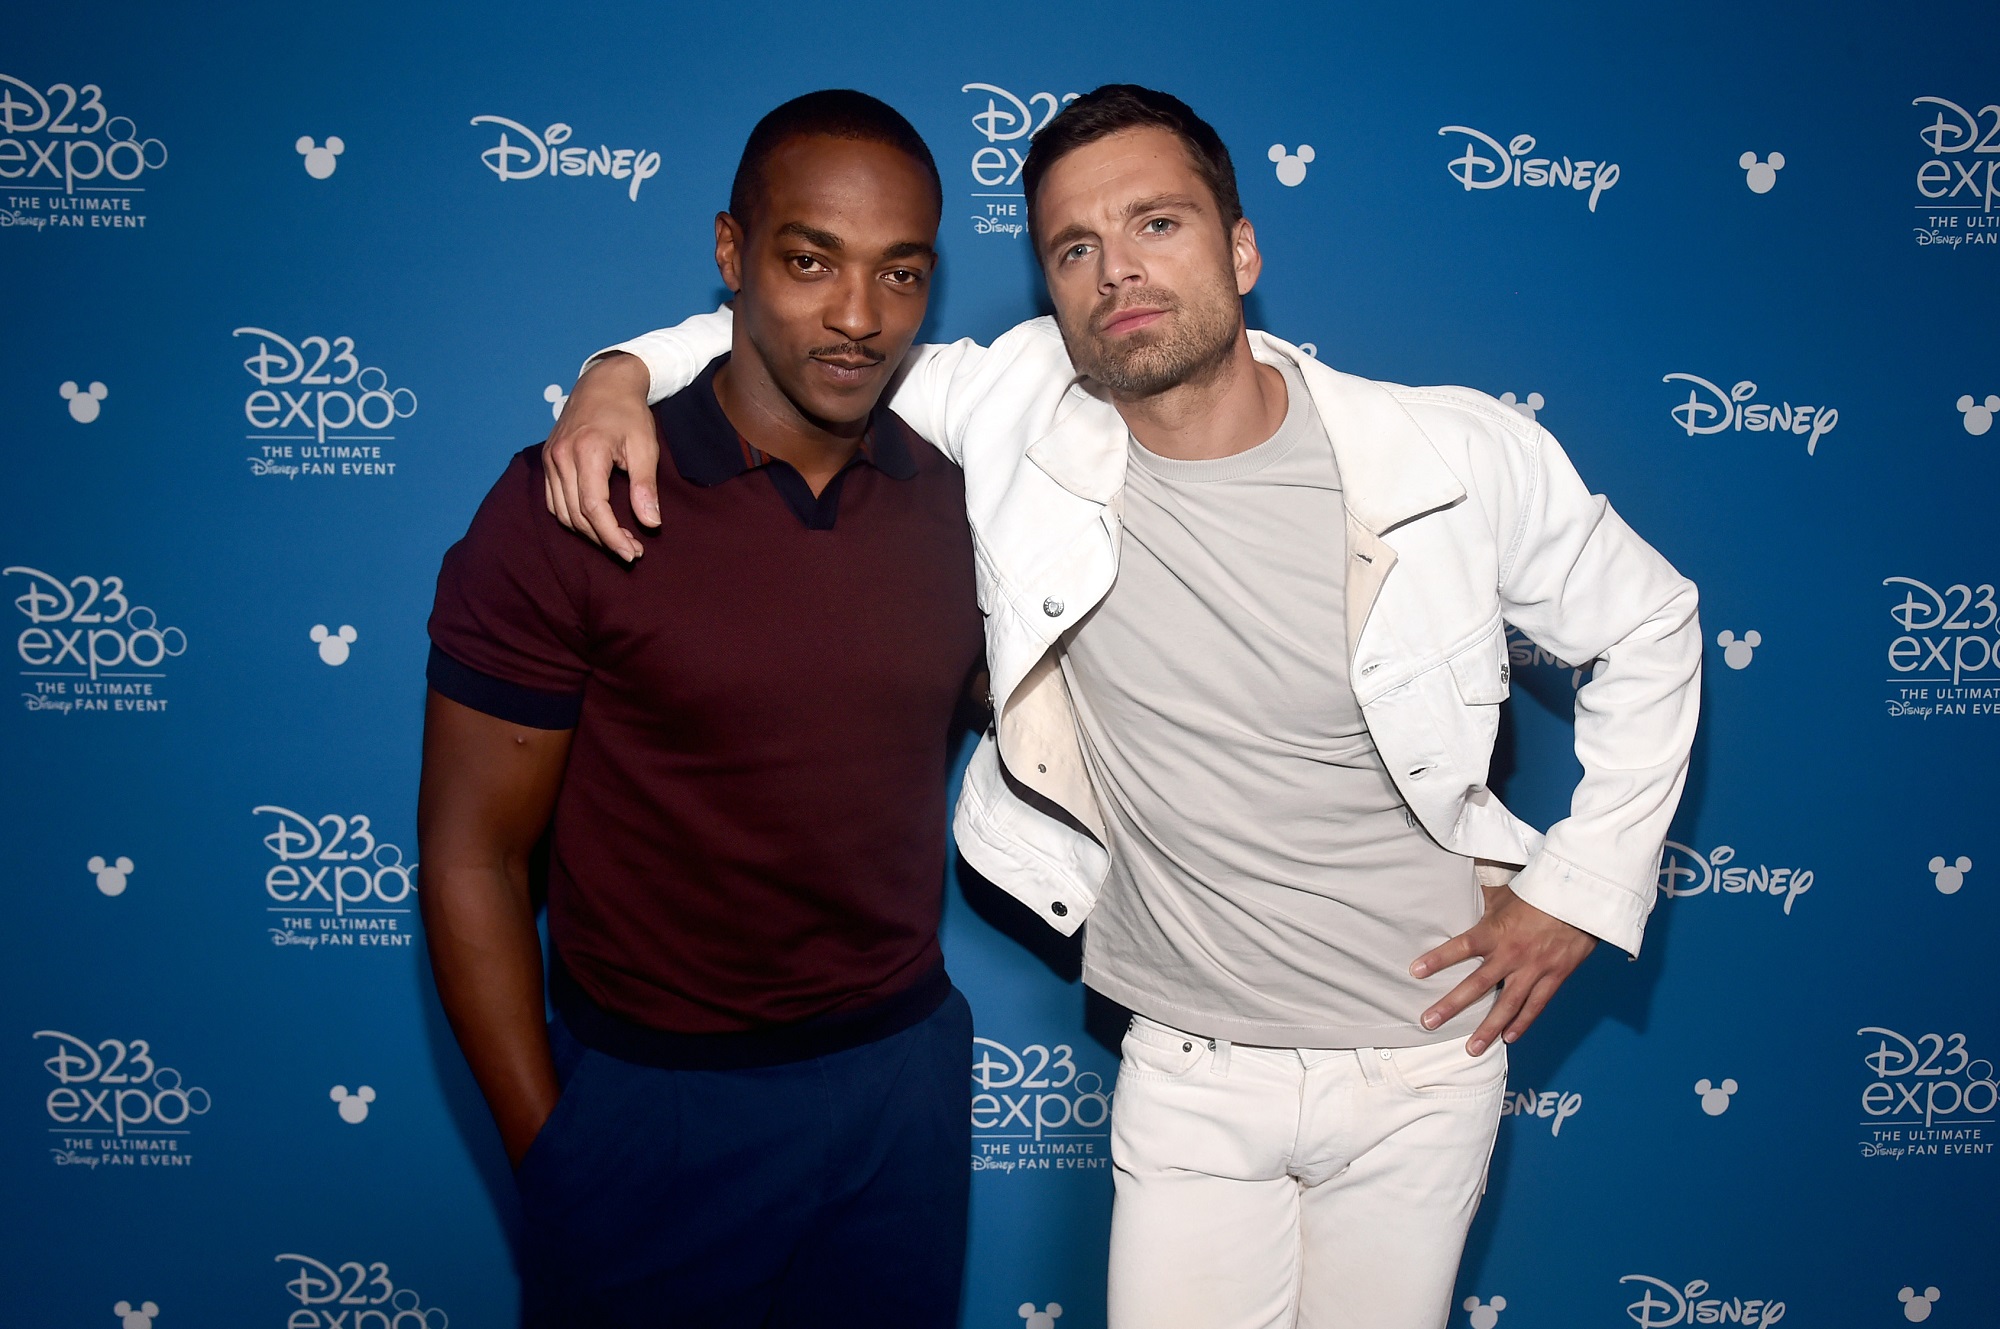 Anthony Mackie and Sebastian Stan pose together at Disney’s D23 EXPO 2019